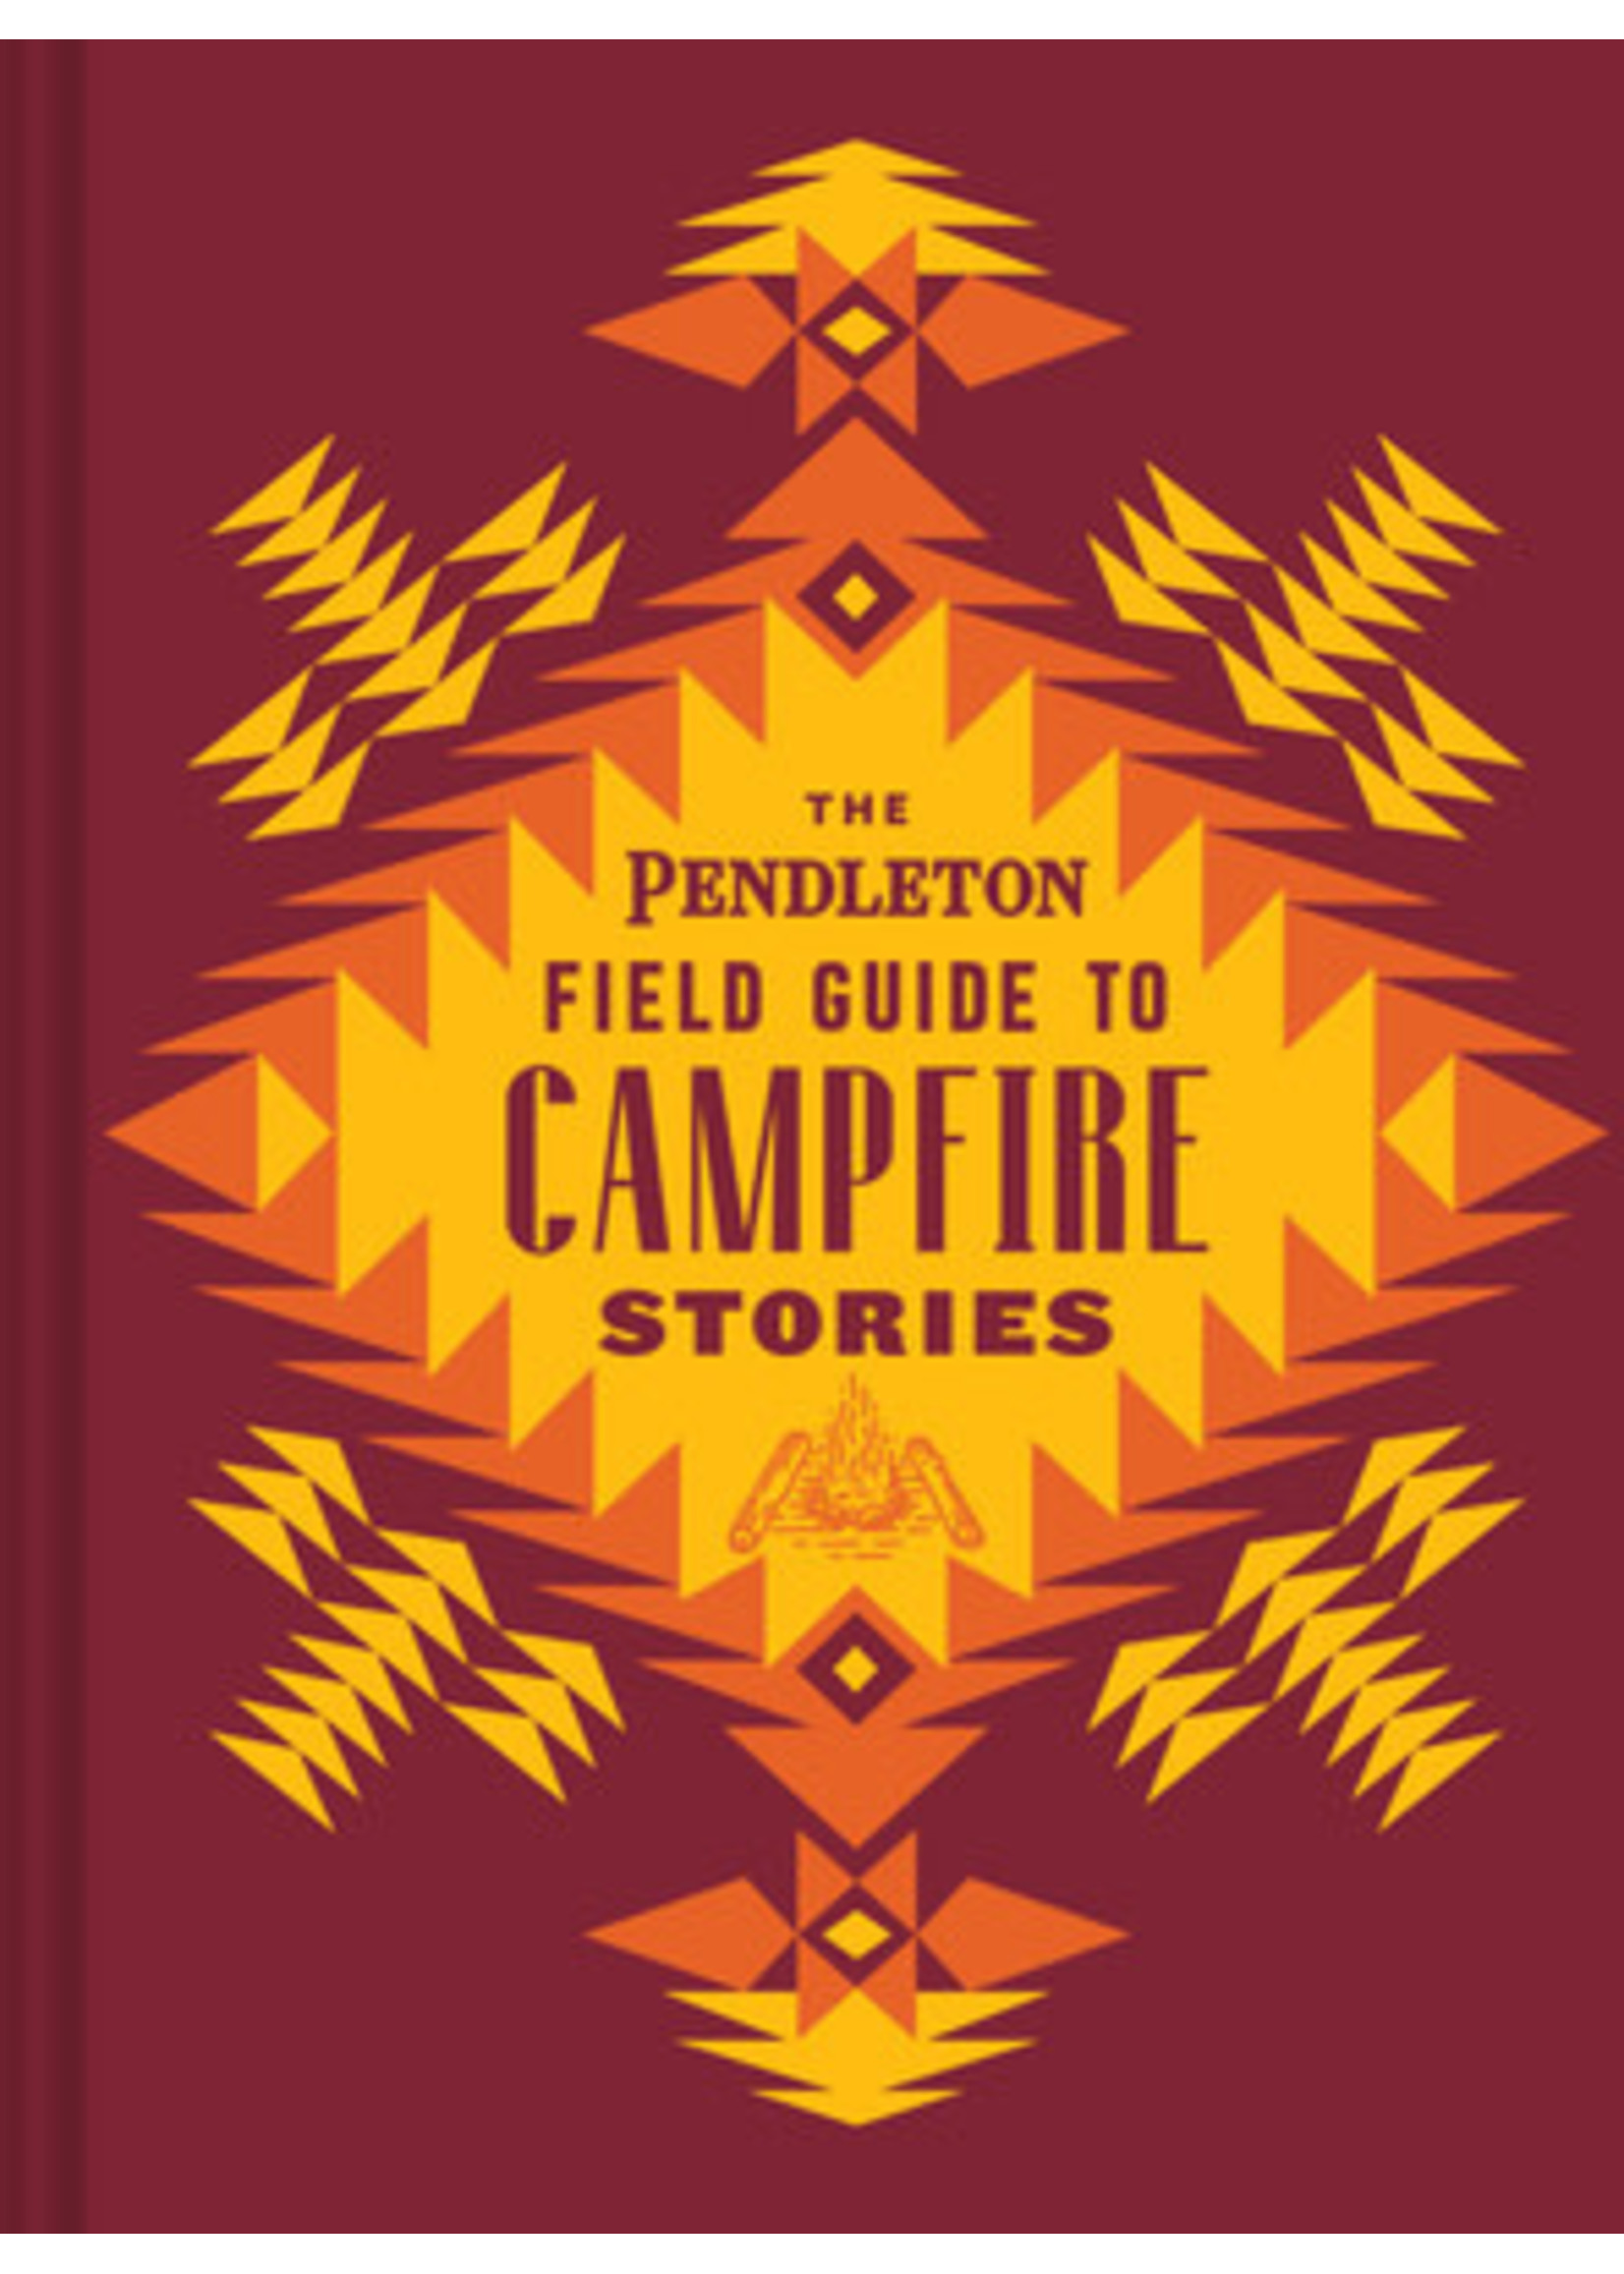 The Pendleton Field Guide to Campfire Stories by Pendleton Woolen Mills